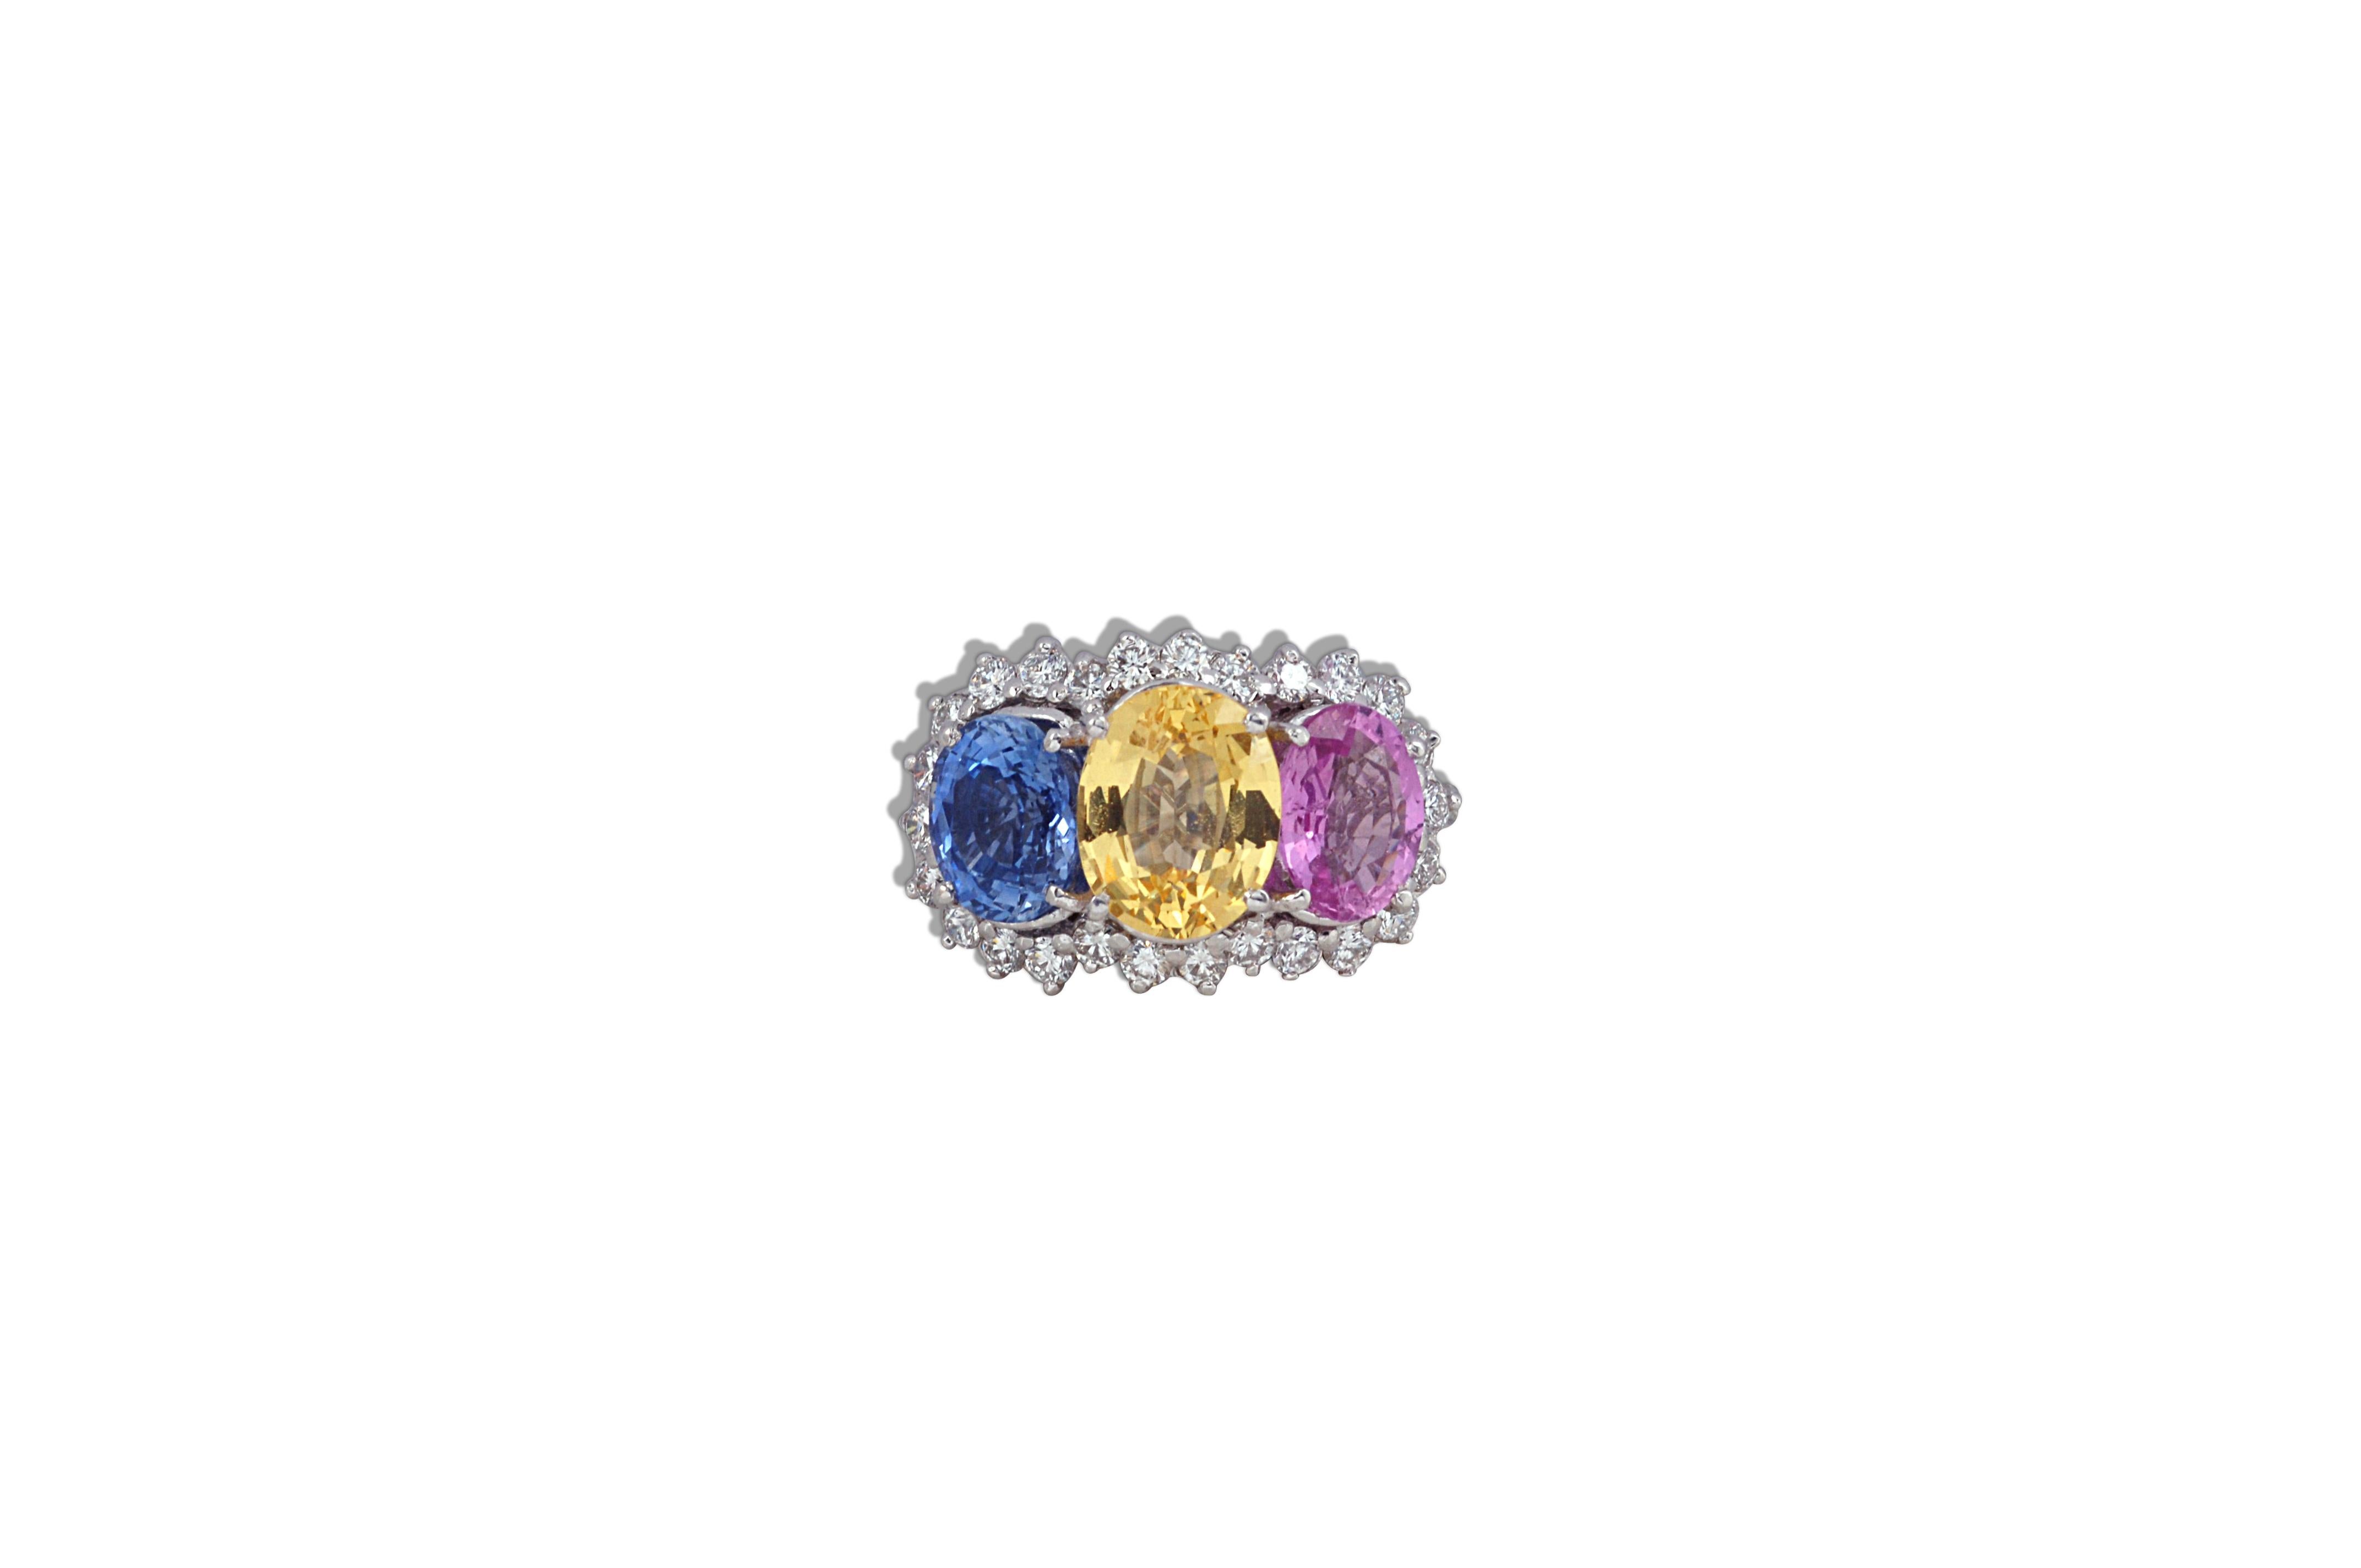 The three stones can  symbolize friendship, love and fidelity. Three stone engagement rings are also commonly known as trilogy or trinity rings. This 3-stone ring comprises of a Blue Sapphire 1.76 carats, Pink Sapphire 1.42 carats and Yellow